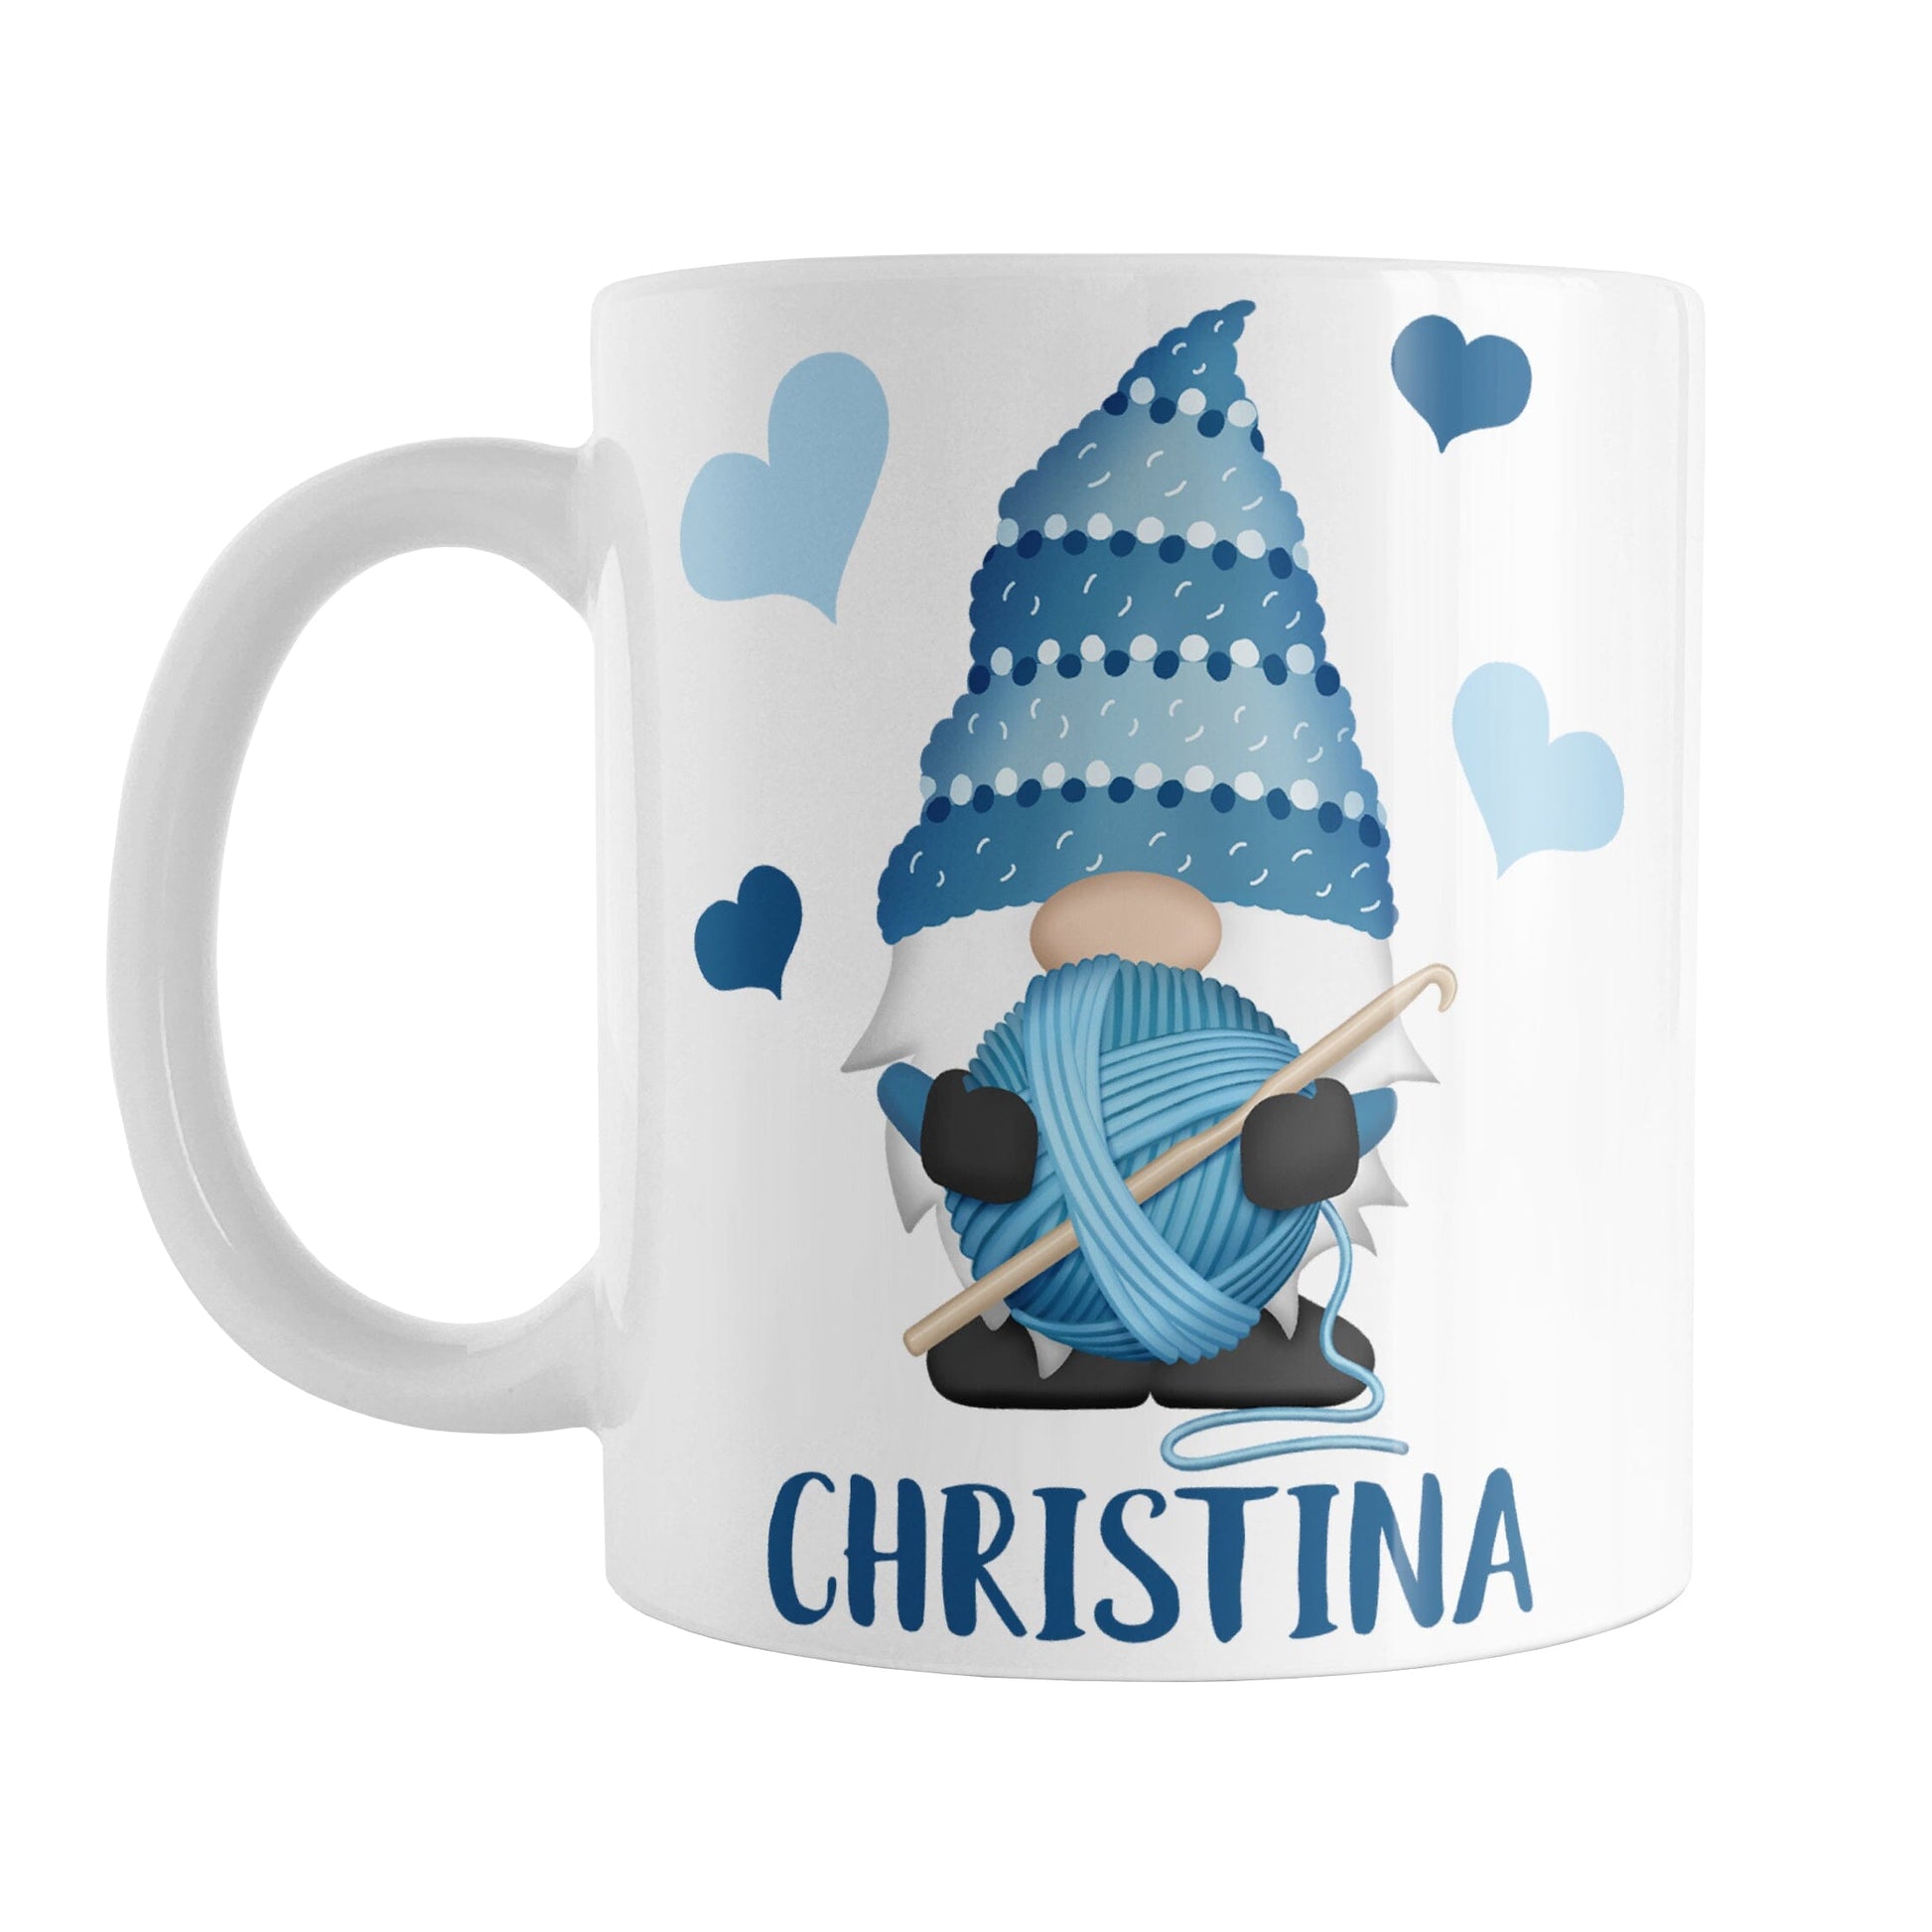 Personalized Blue Crochet Gnome Mug (11oz) at Amy's Coffee Mugs. A ceramic coffee mug designed with a cute gnome wearing a blue crochet hat while holding a ball of blue yarn and a crochet hook with blue hearts around him. Your name is printed in a fun blue font below the gnome. This adorable illustration and personalization is on both sides of the mug. 